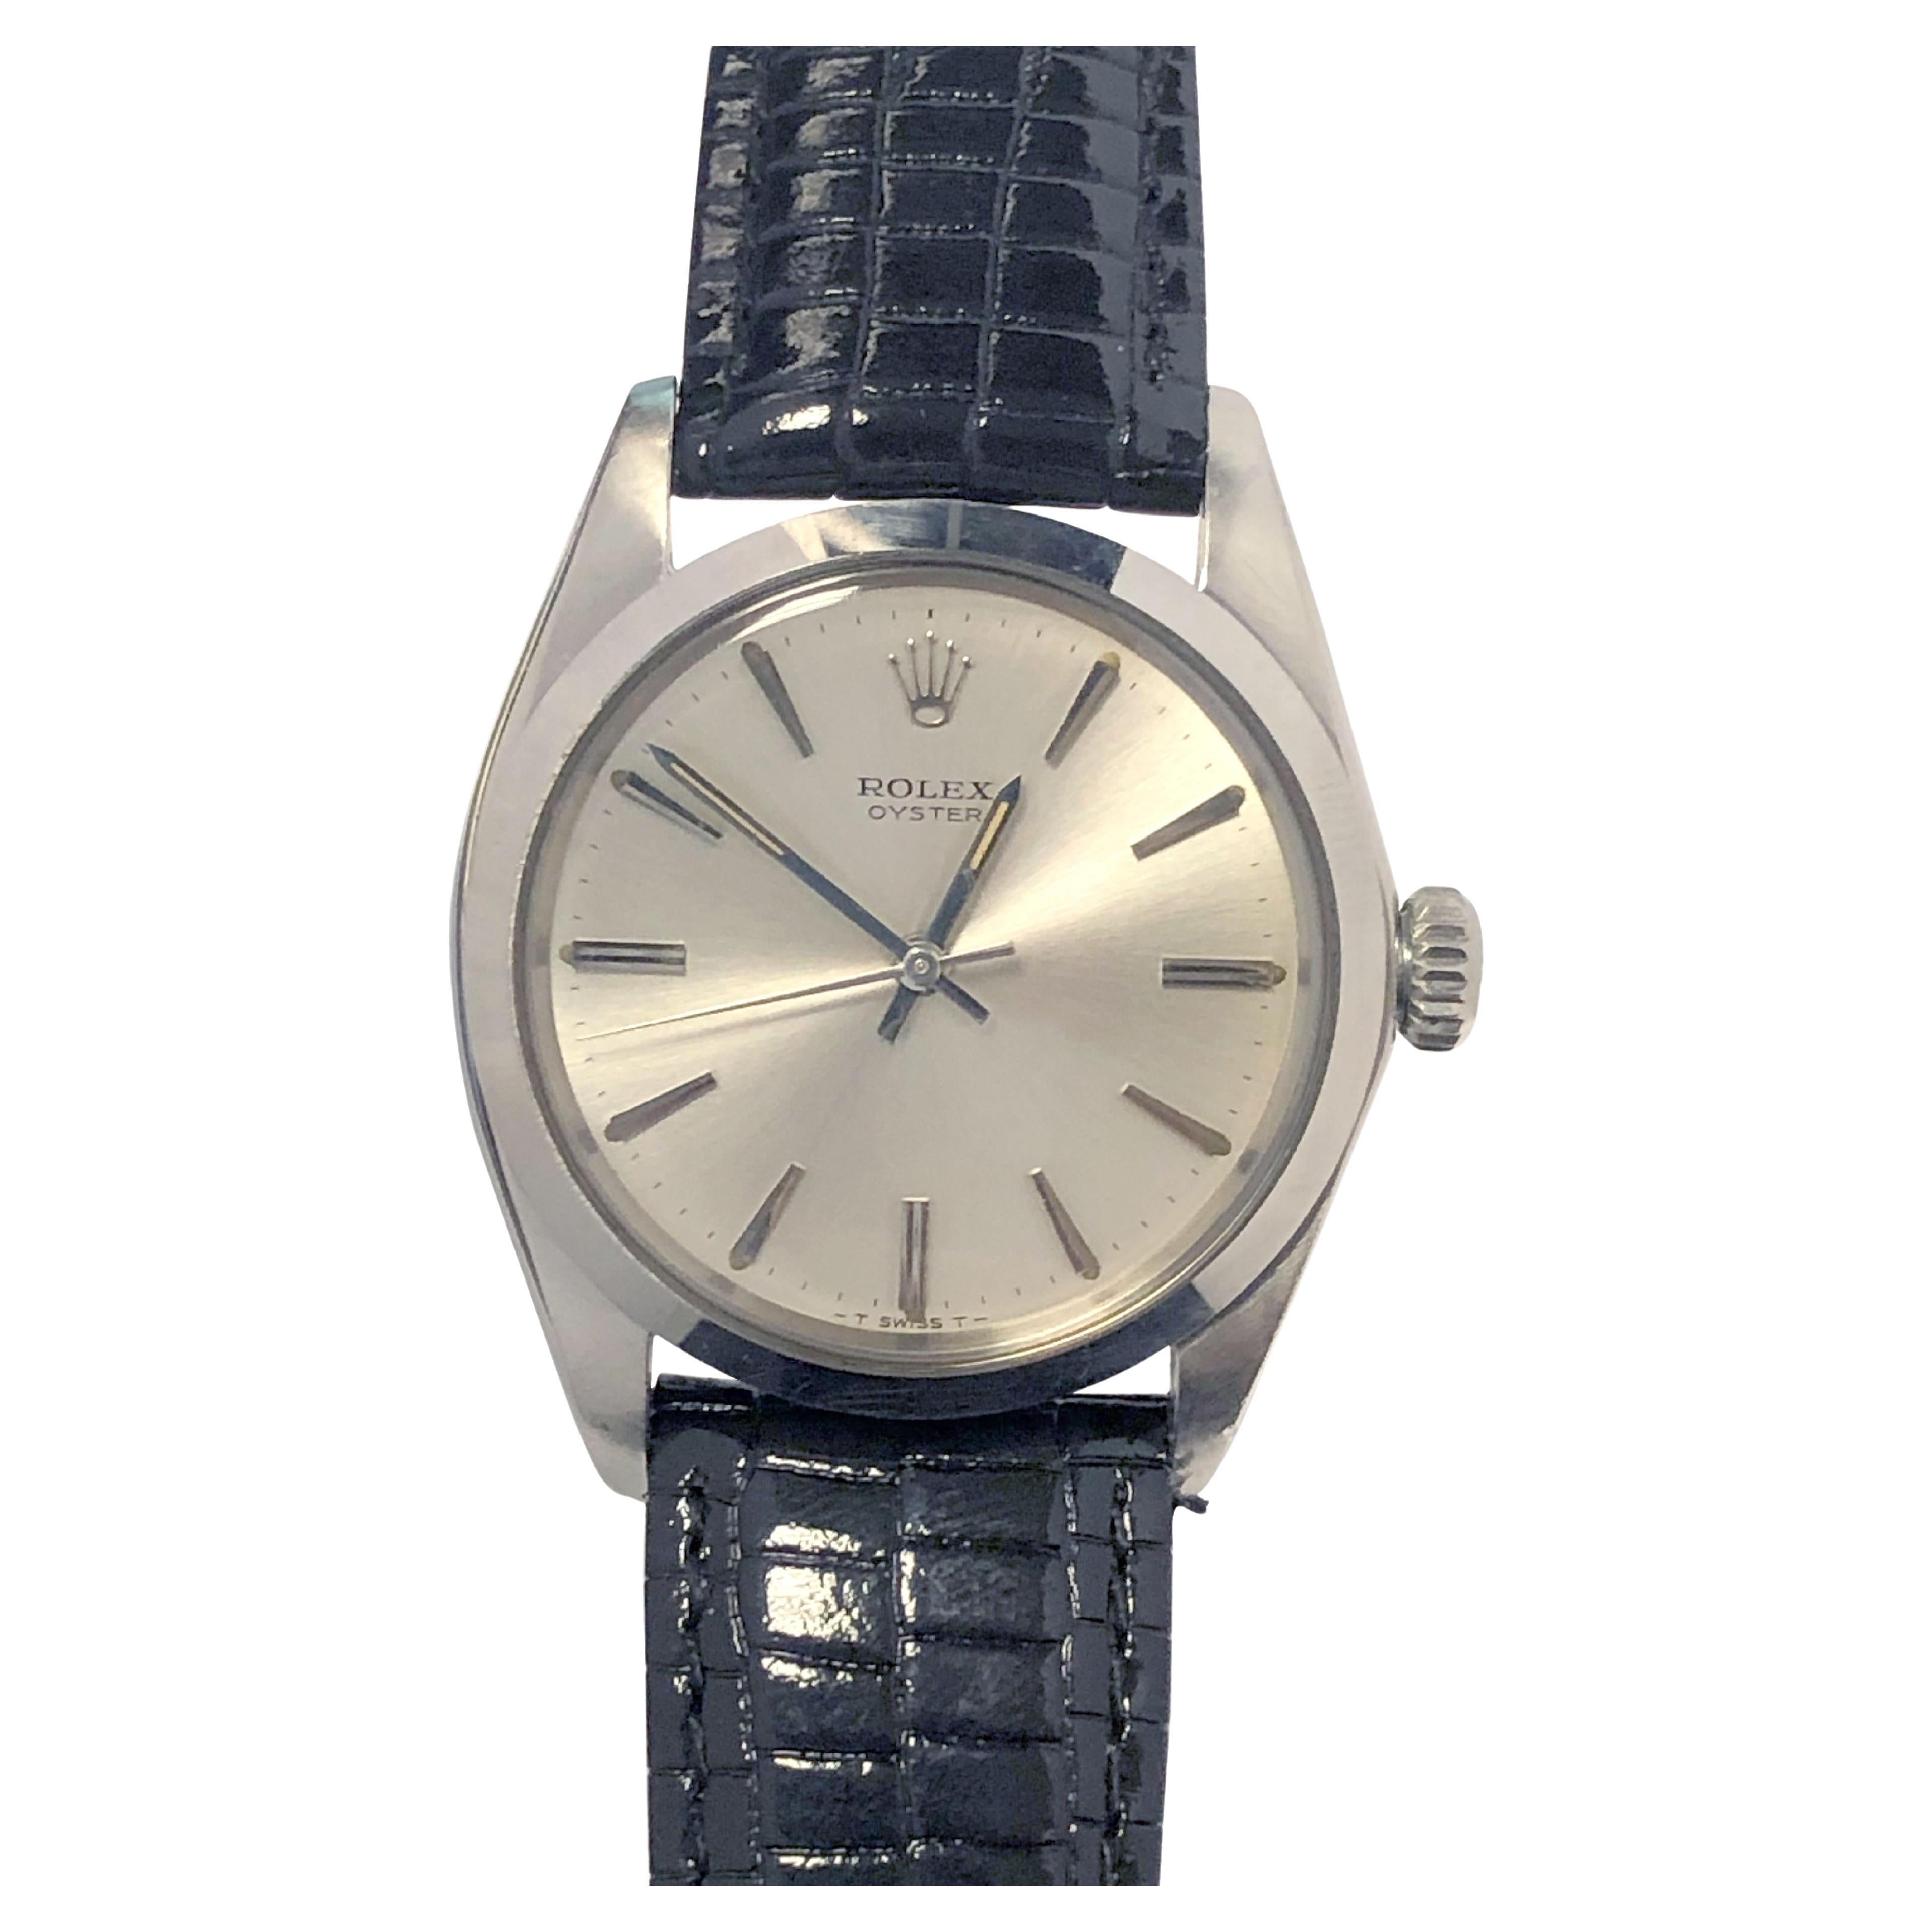 Rolex Vintage 1959 Oyster Manual Wind Stainless Steel Wrist Watch For Sale